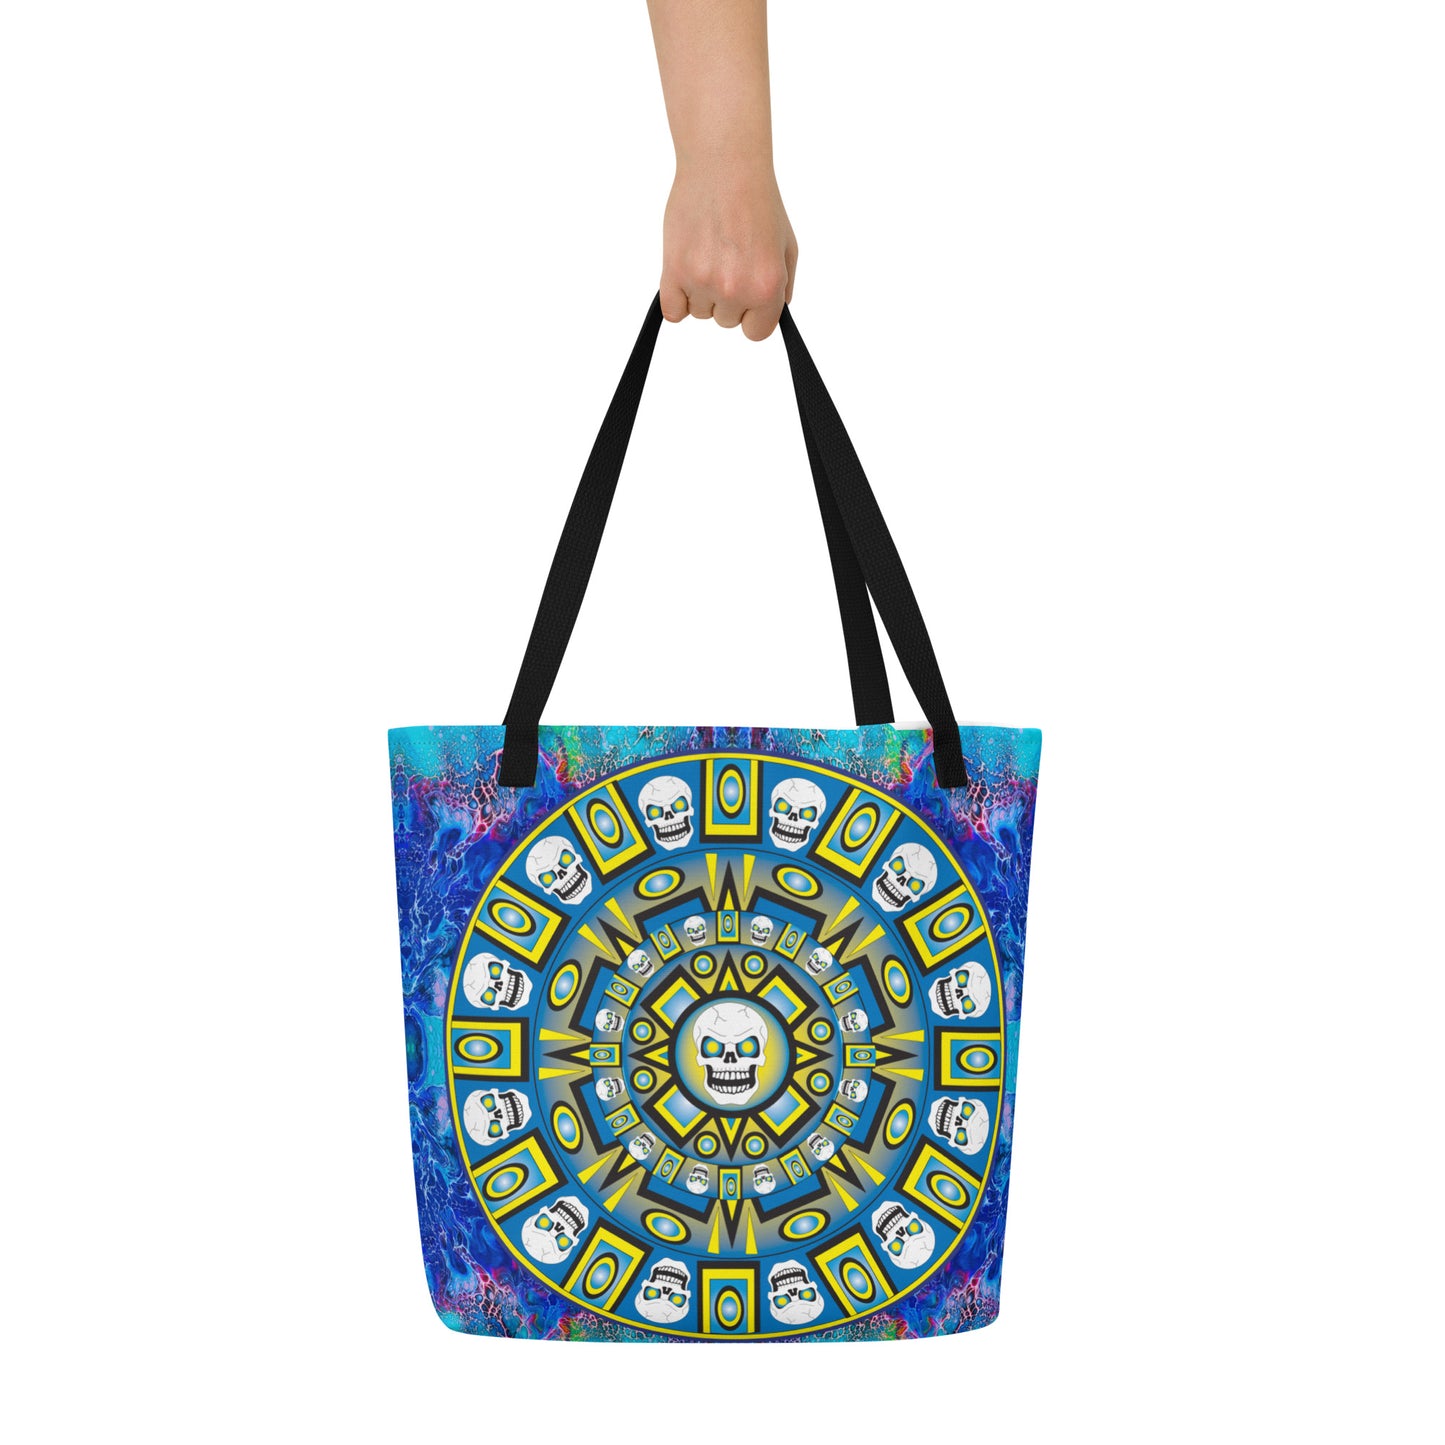 All-Over Print Large Tote Bag - SW-007